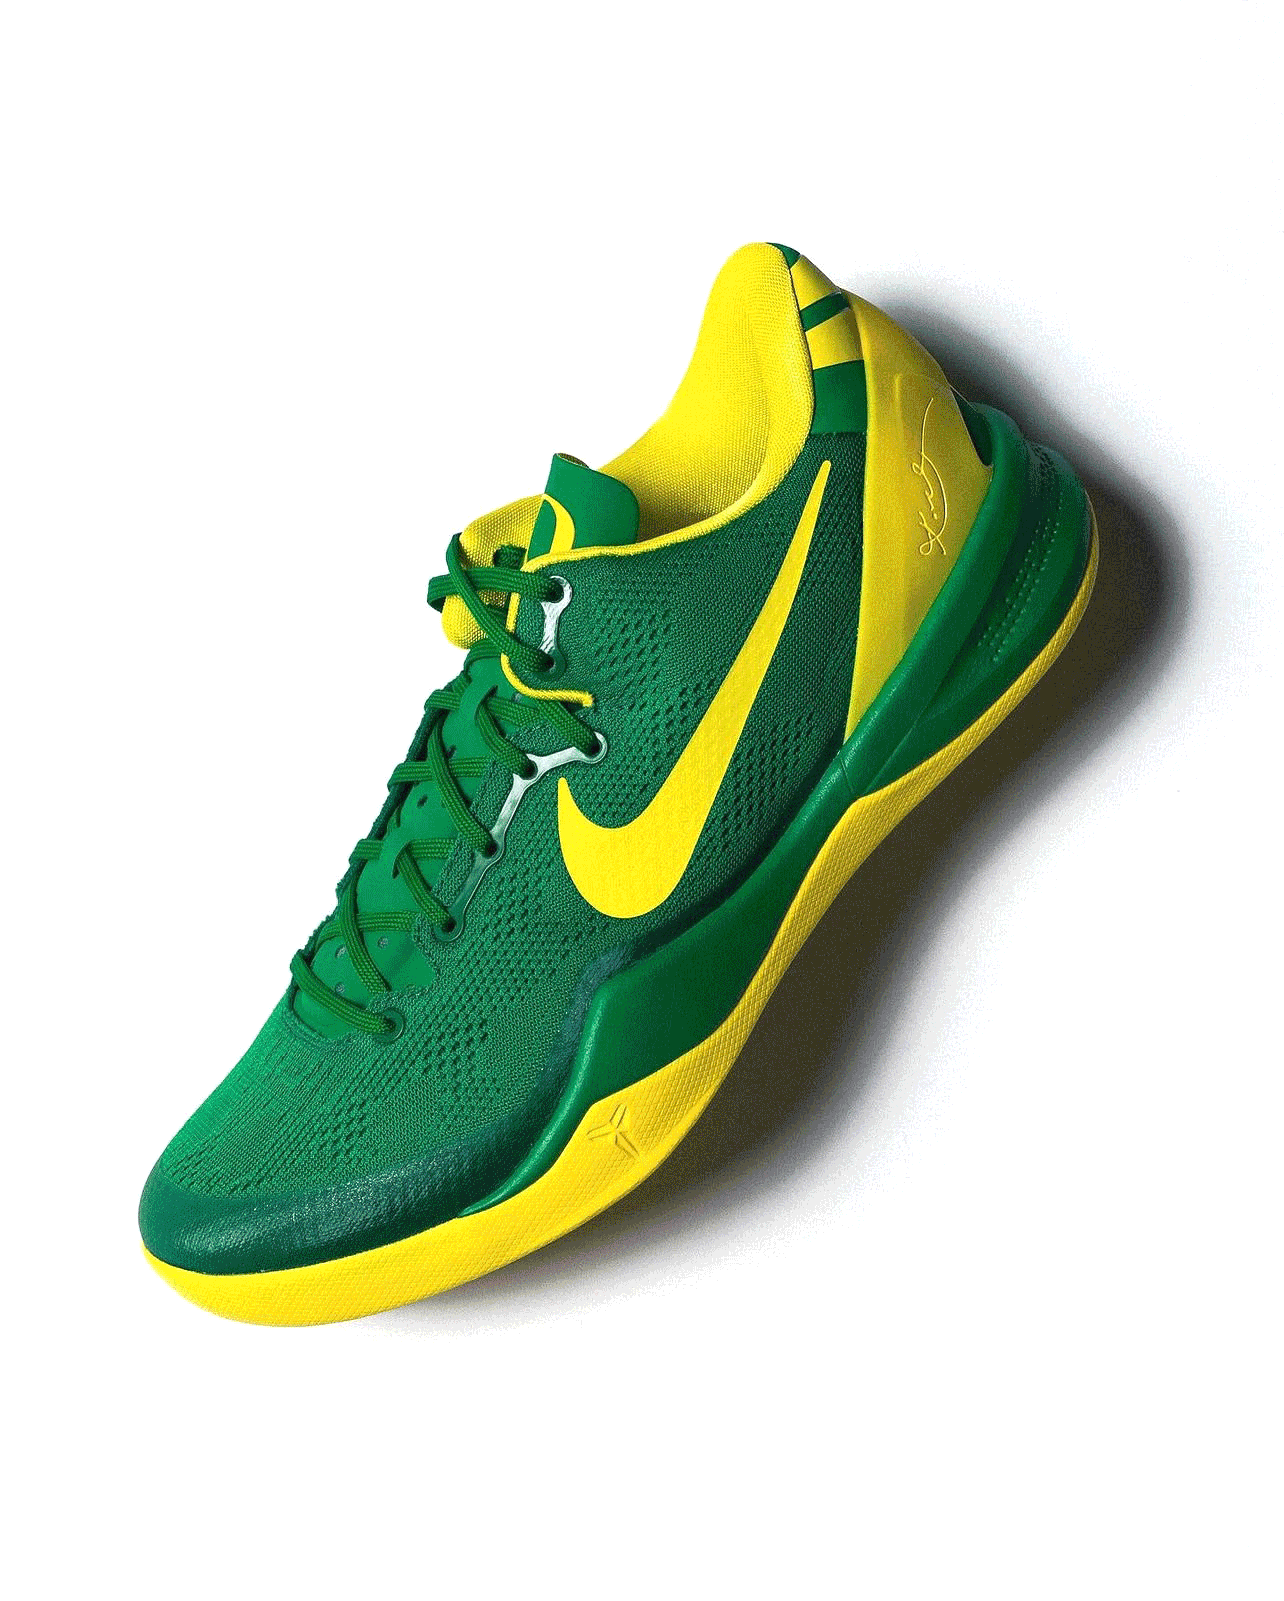 Nike Unveils New Kobe 8 Exclusives for the Oregon Ducks